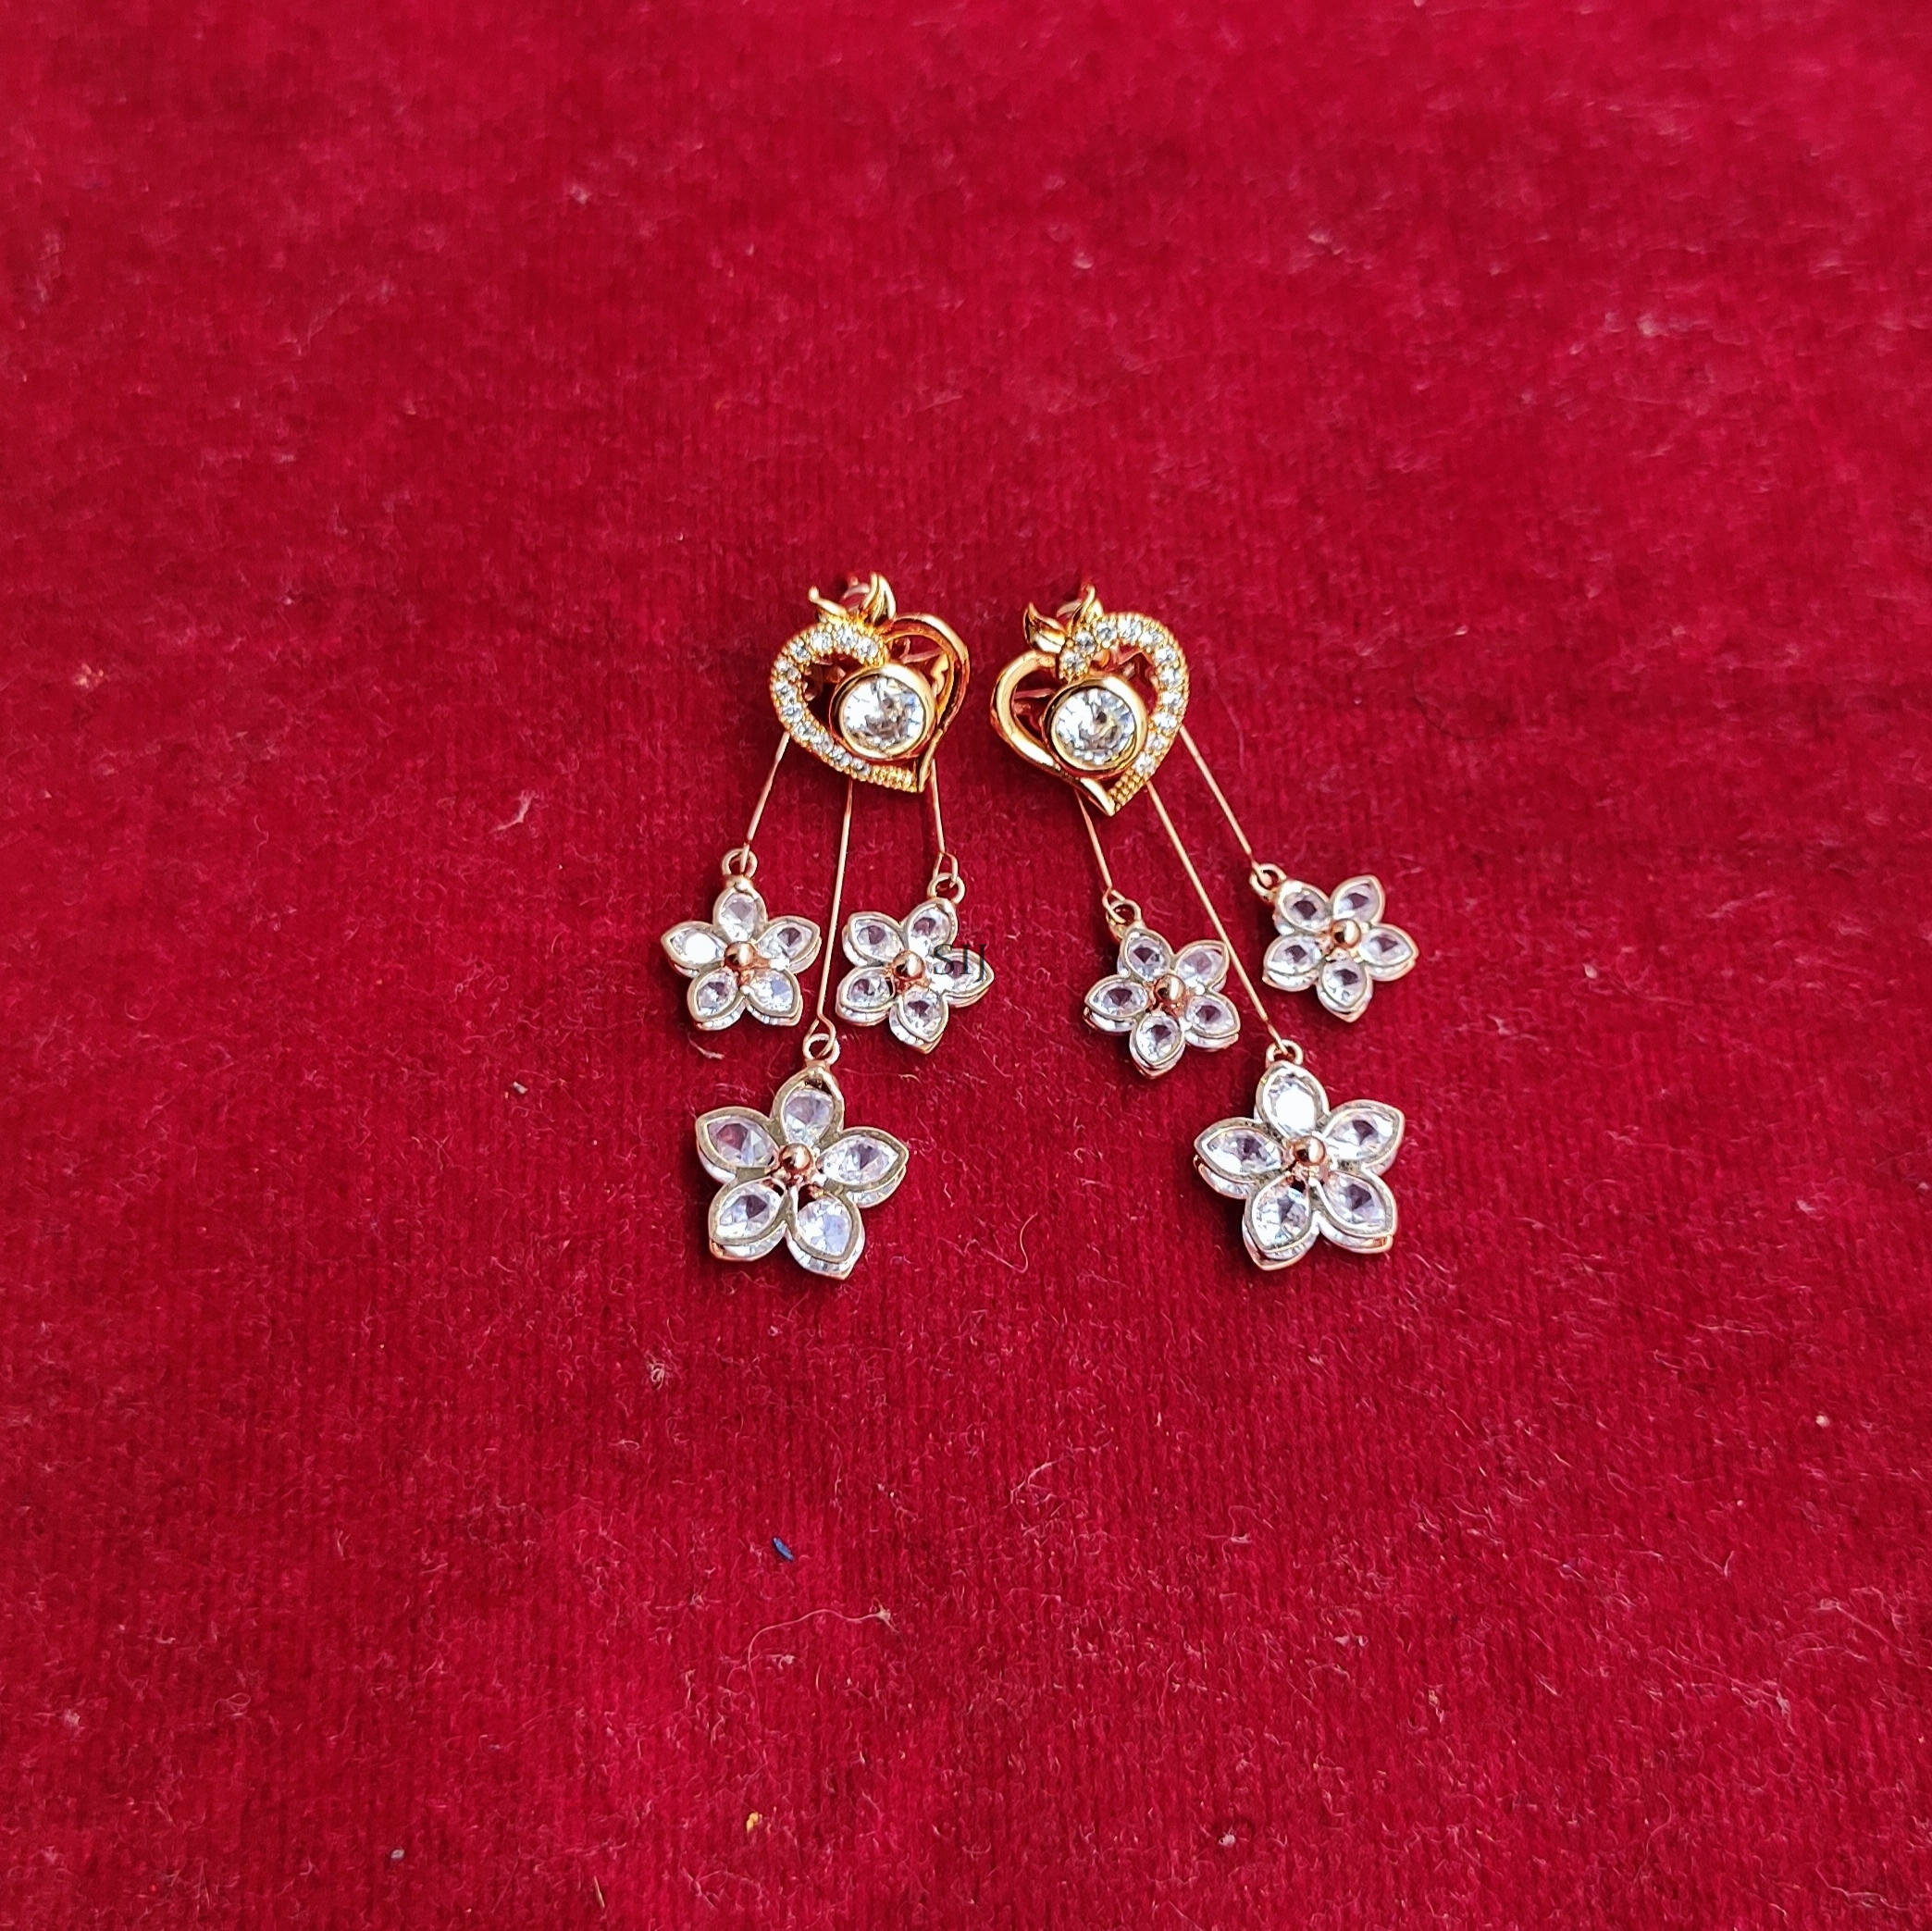 Imitation Rose Gold Earrings with Flower Design Hangings